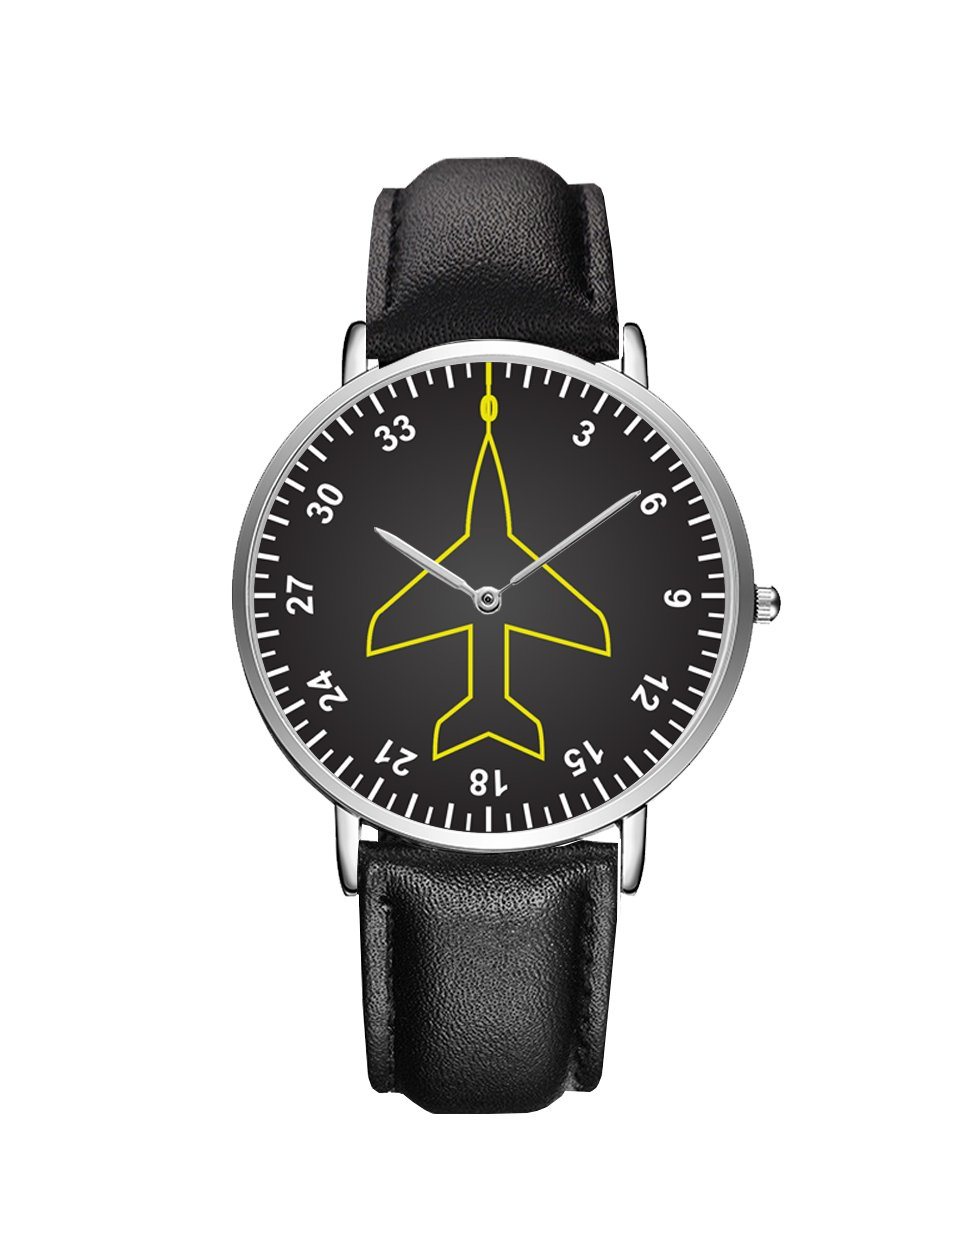 Airplane Instrument Series (Heading) Leather Strap Watches Pilot Eyes Store Silver & Black Leather Strap 